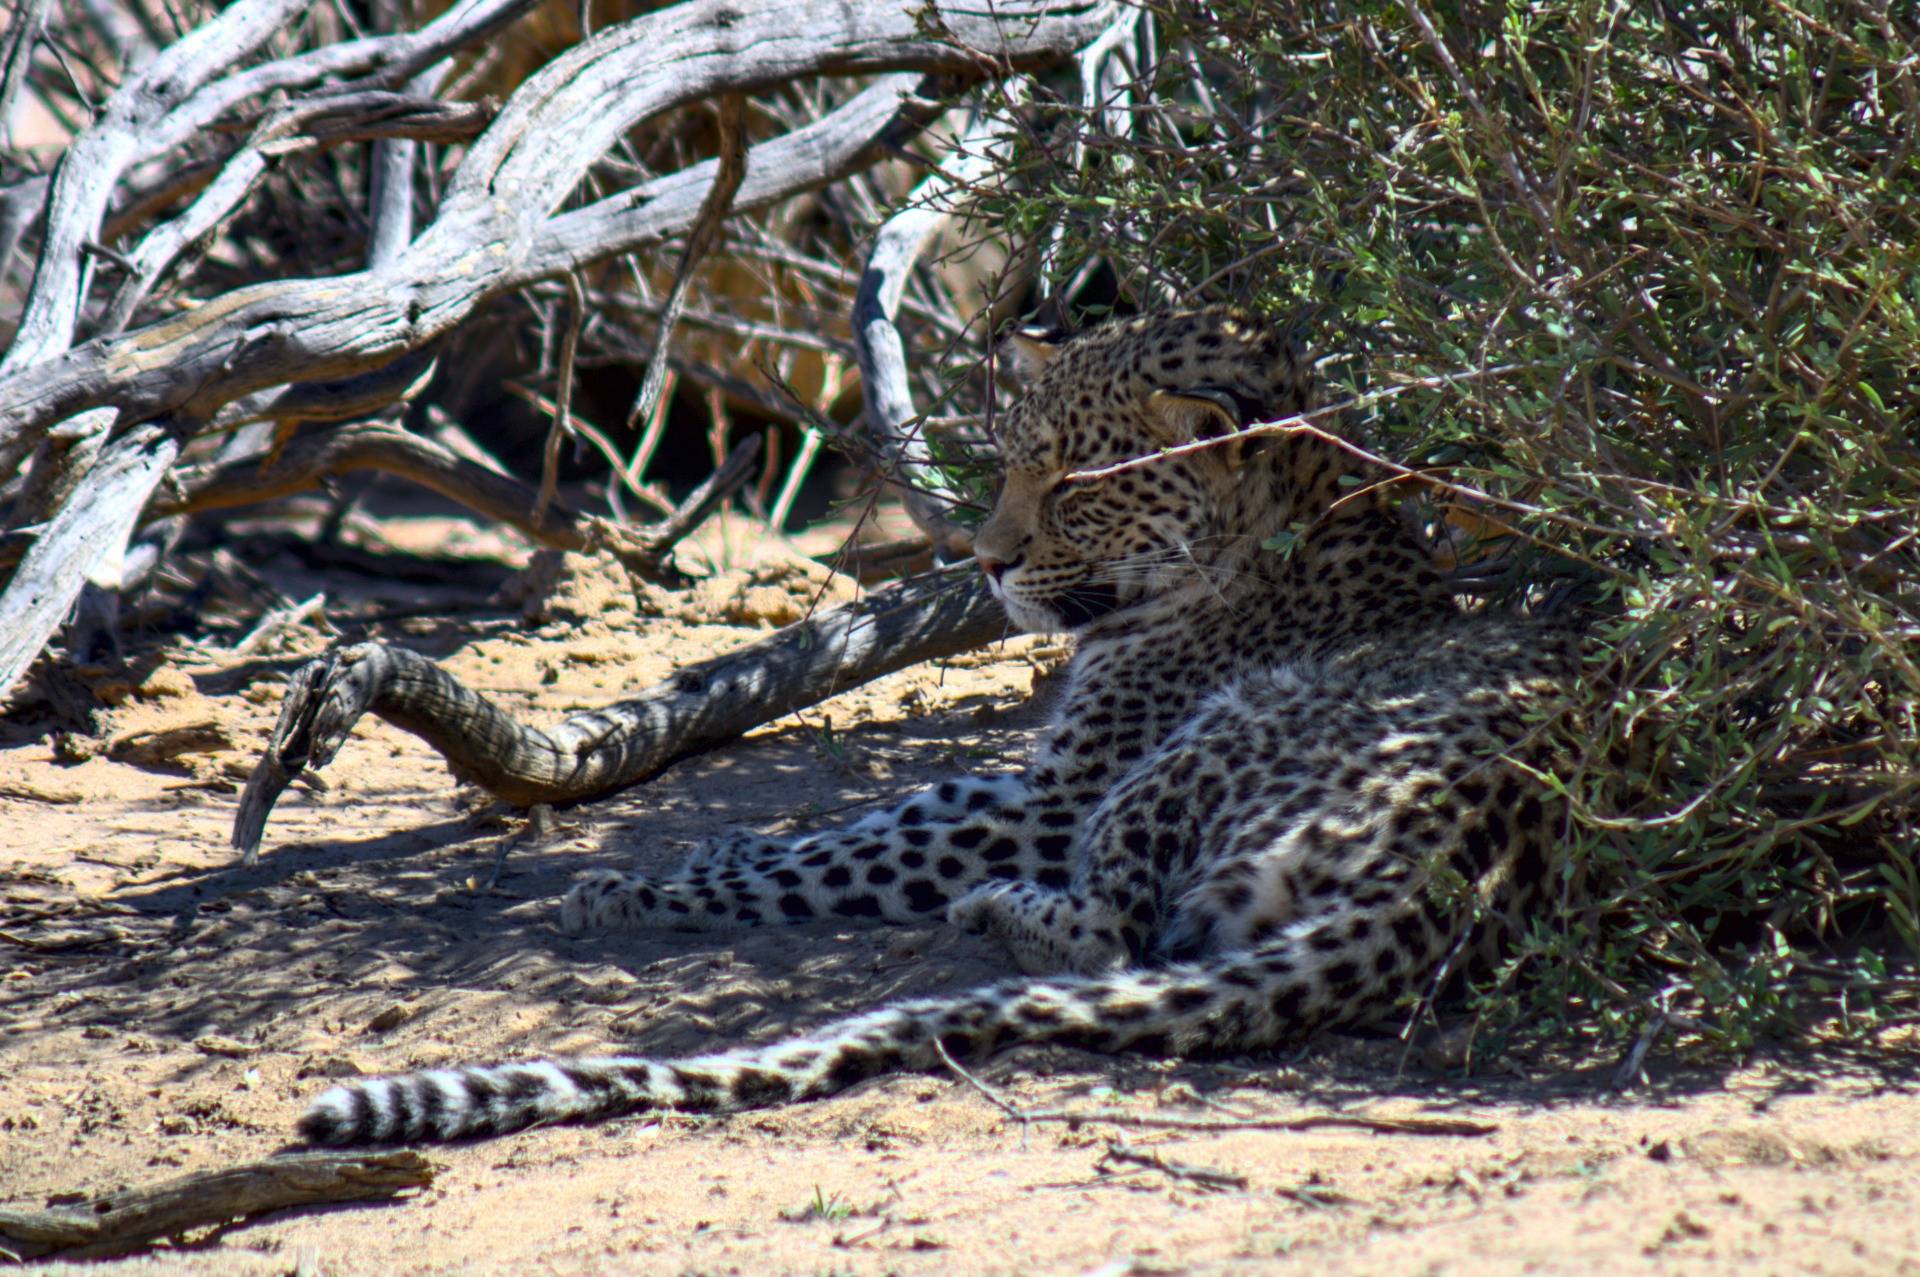 Another photo of the Leopard.